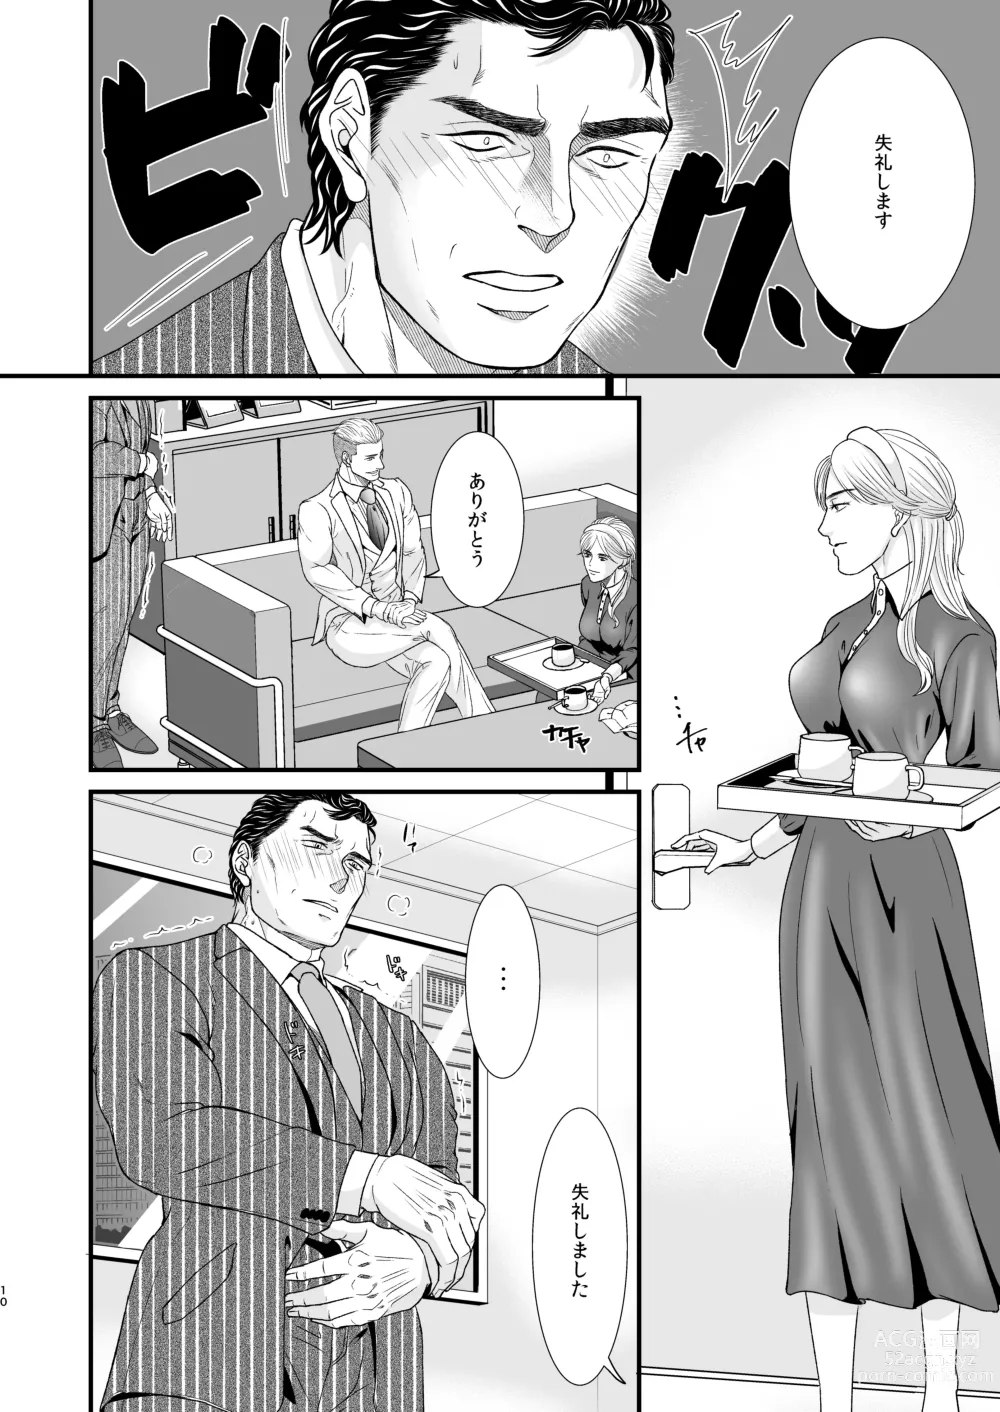 Page 9 of doujinshi Confusion 2